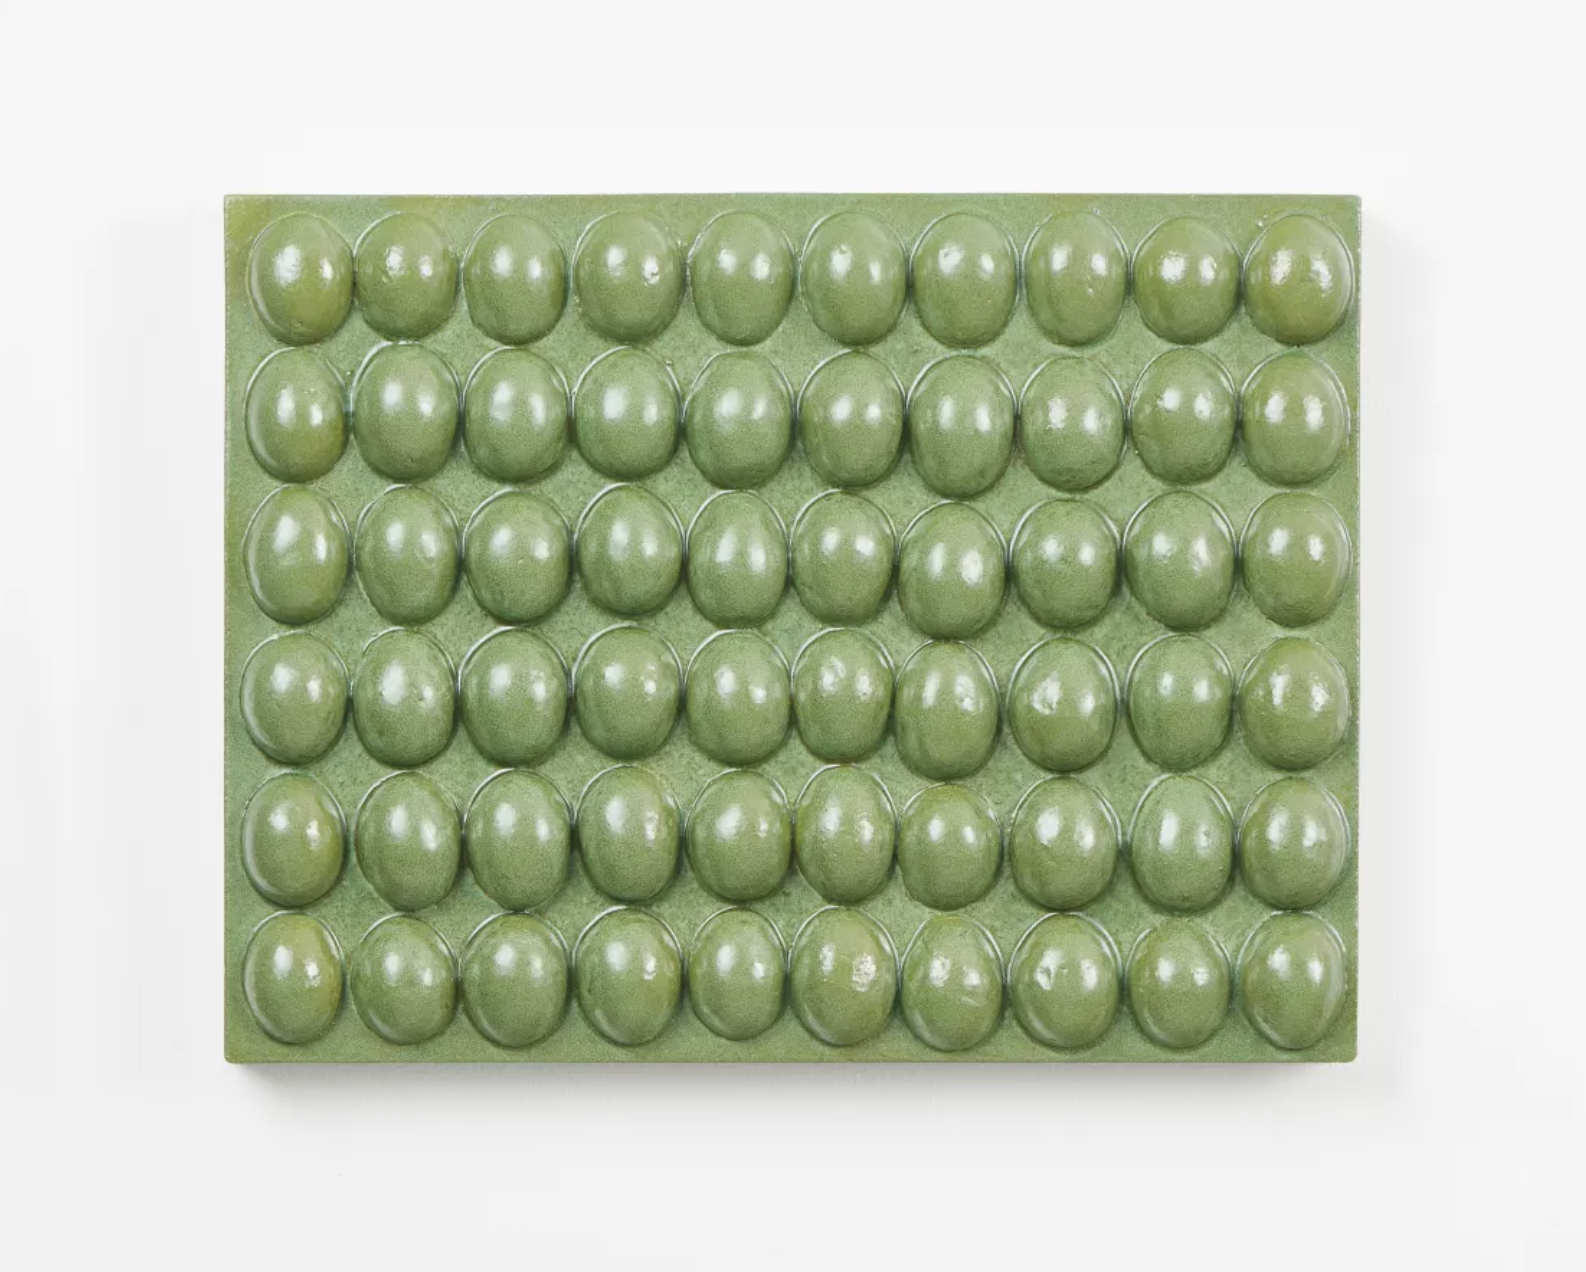 Mai-Thu Perret, Actually know your own mind, 2016. Courtesy the artist and Simon Lee Gallery.